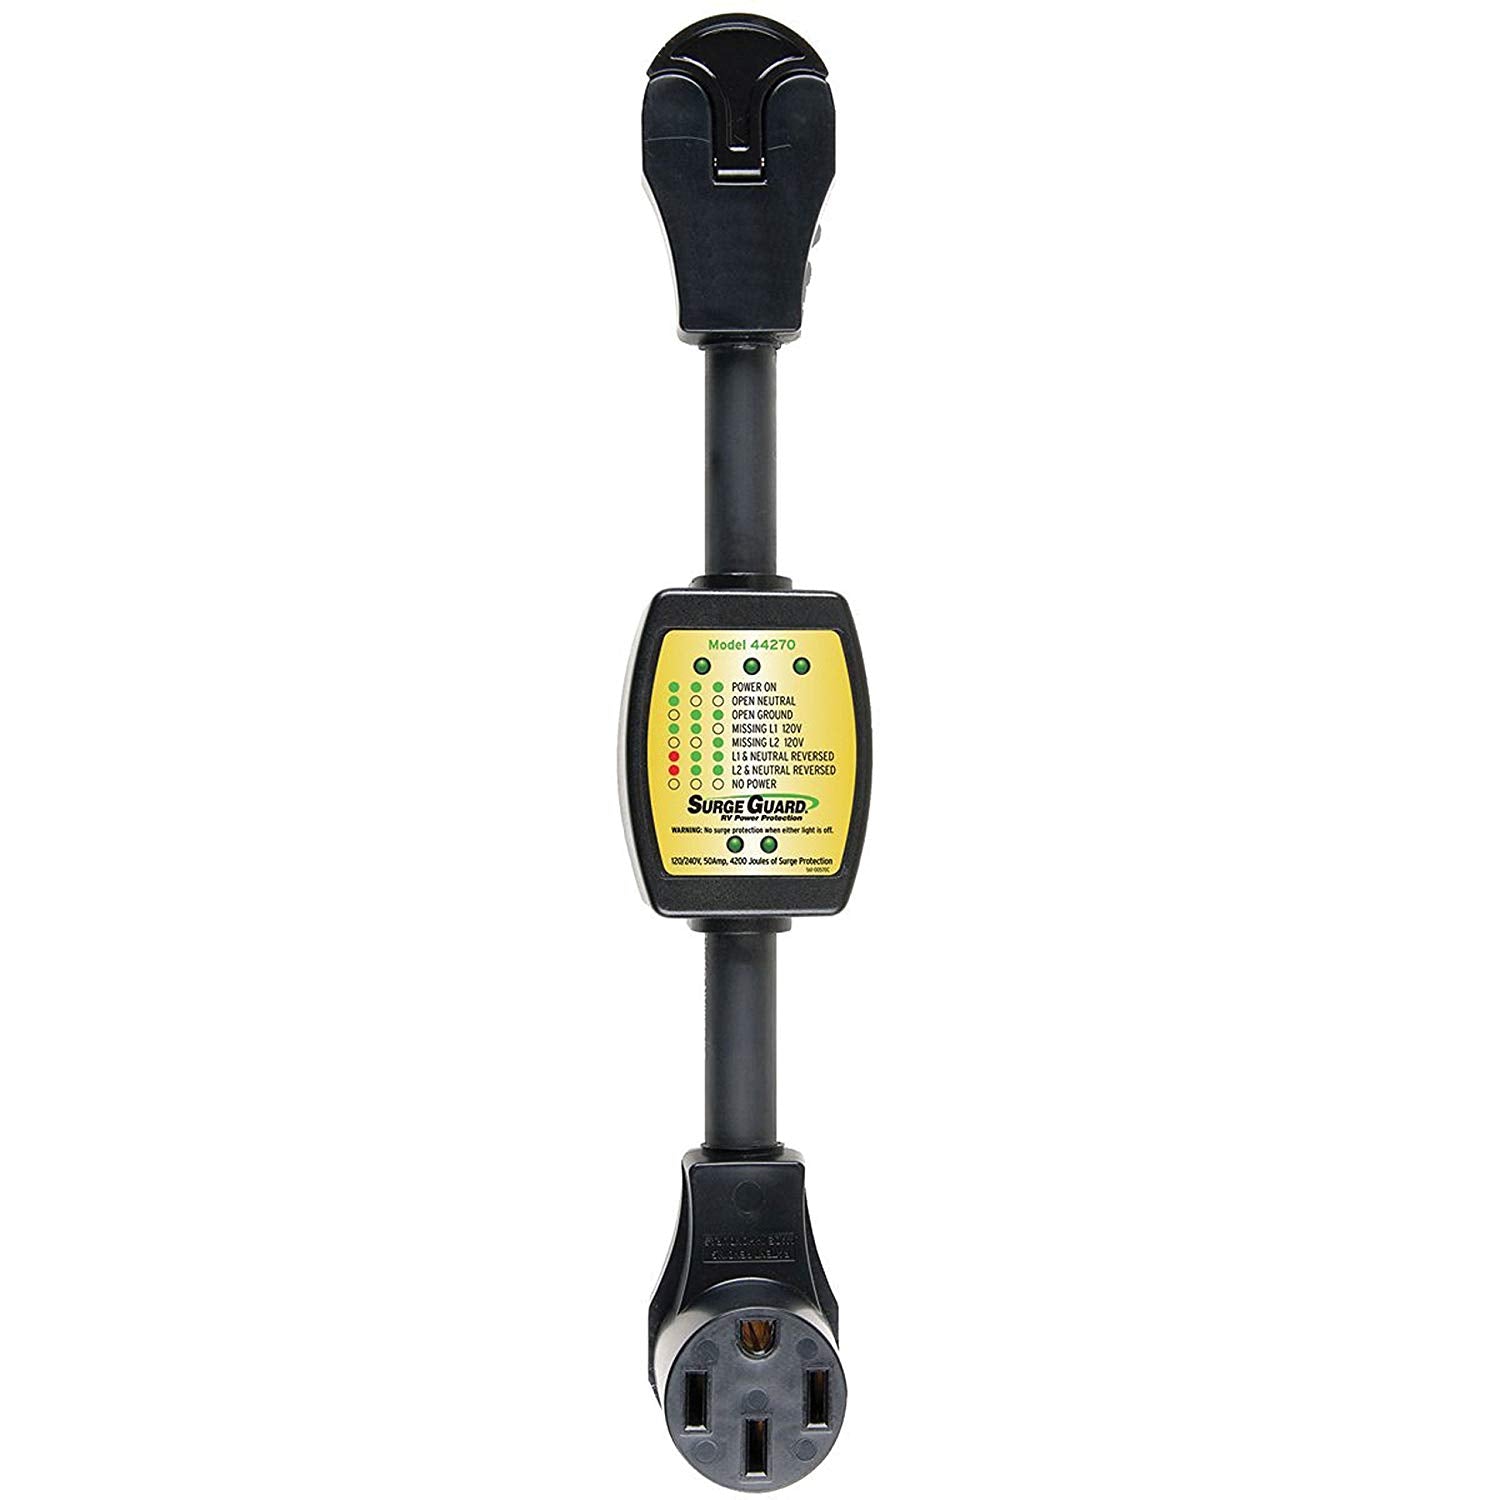 SouthWire Corp. 44270 Surge Protector; Surge Guard (R); Use To Identify Faulty Park Power Plus Offers Surge Protection/ Analyze Circuits To Verify Pedestal Power; 50 Amp; With Fault Indicator Light; Easy-T-Pull Handles; Corrosion Resistant; 4200 Joules Of Power Surge Protection; 120/ 240 Volt